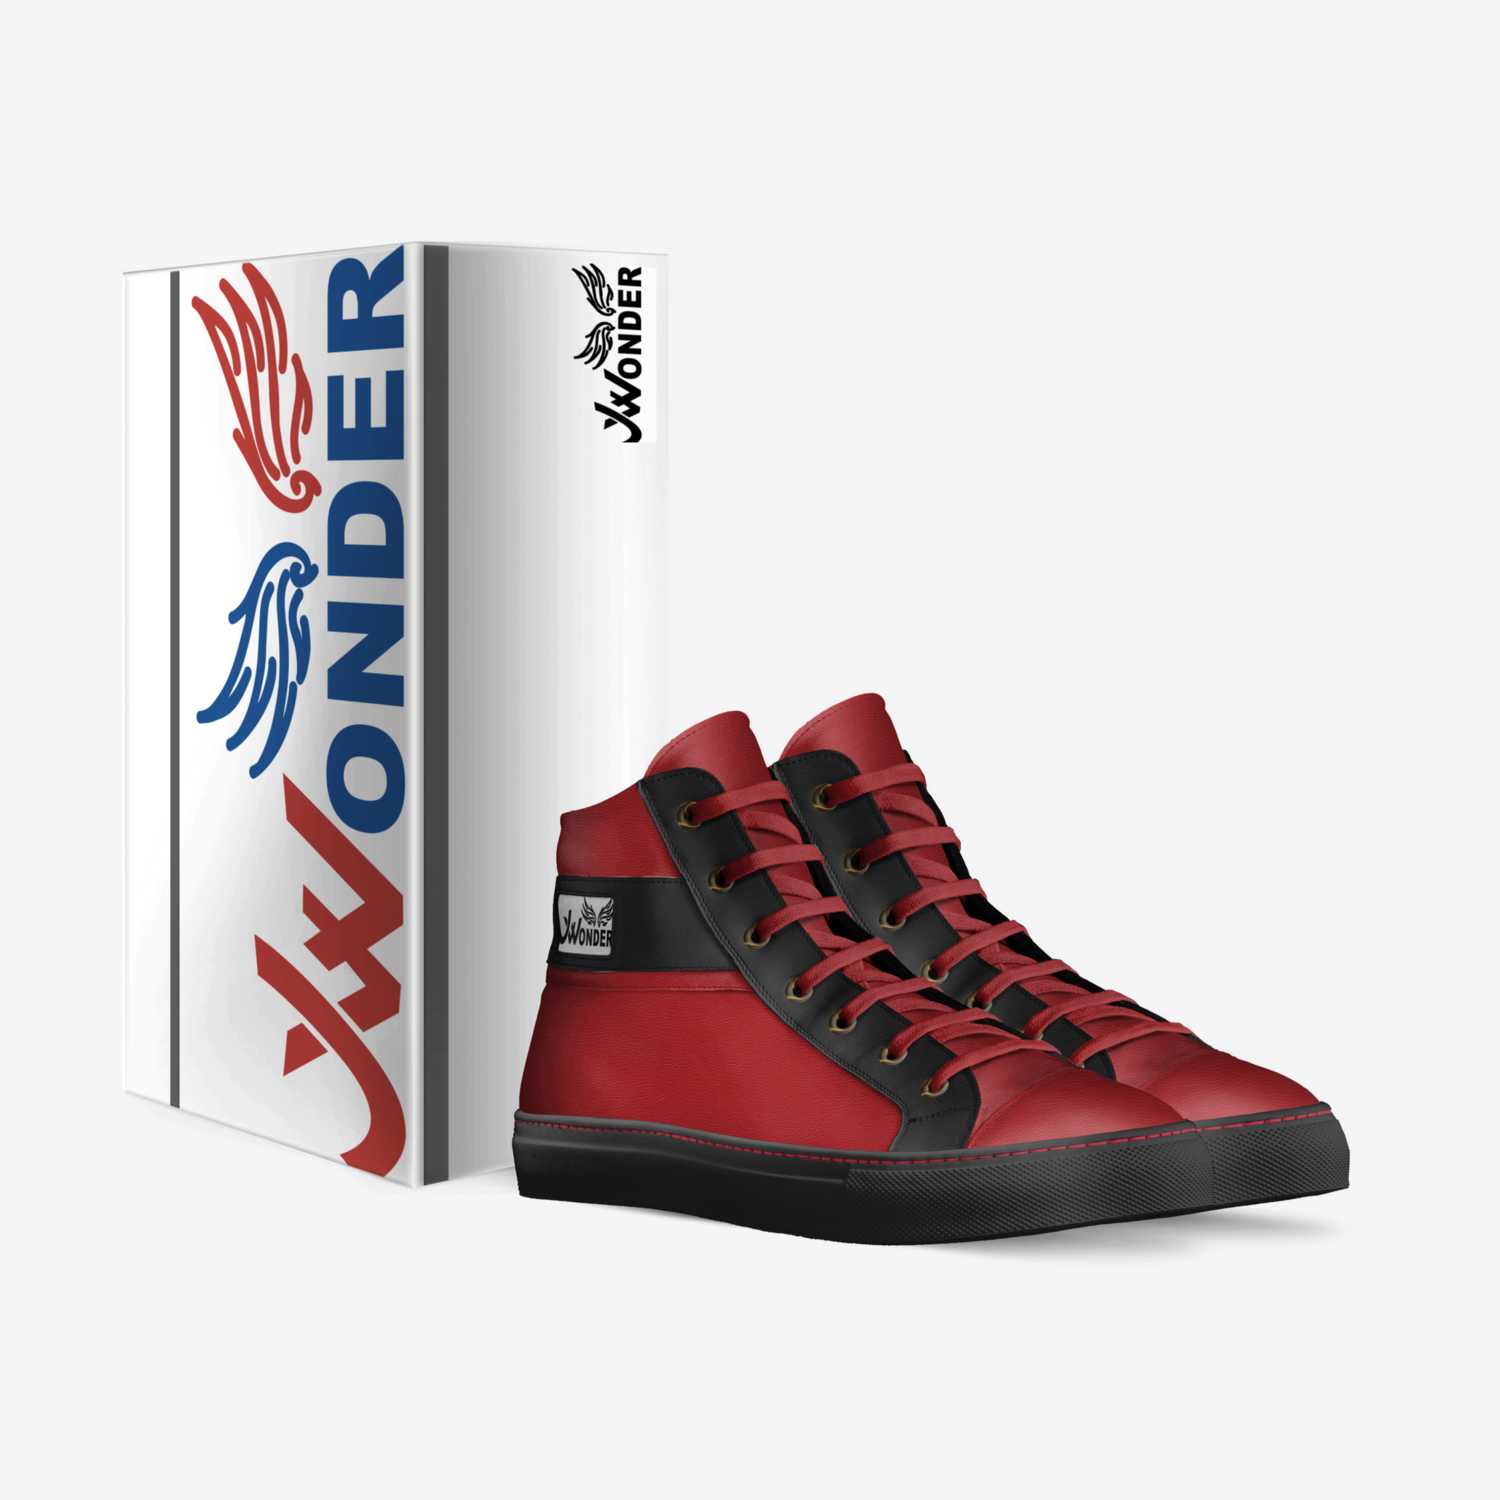 jwonder sound custom made in Italy shoes by Jwonder St Louis | Box view